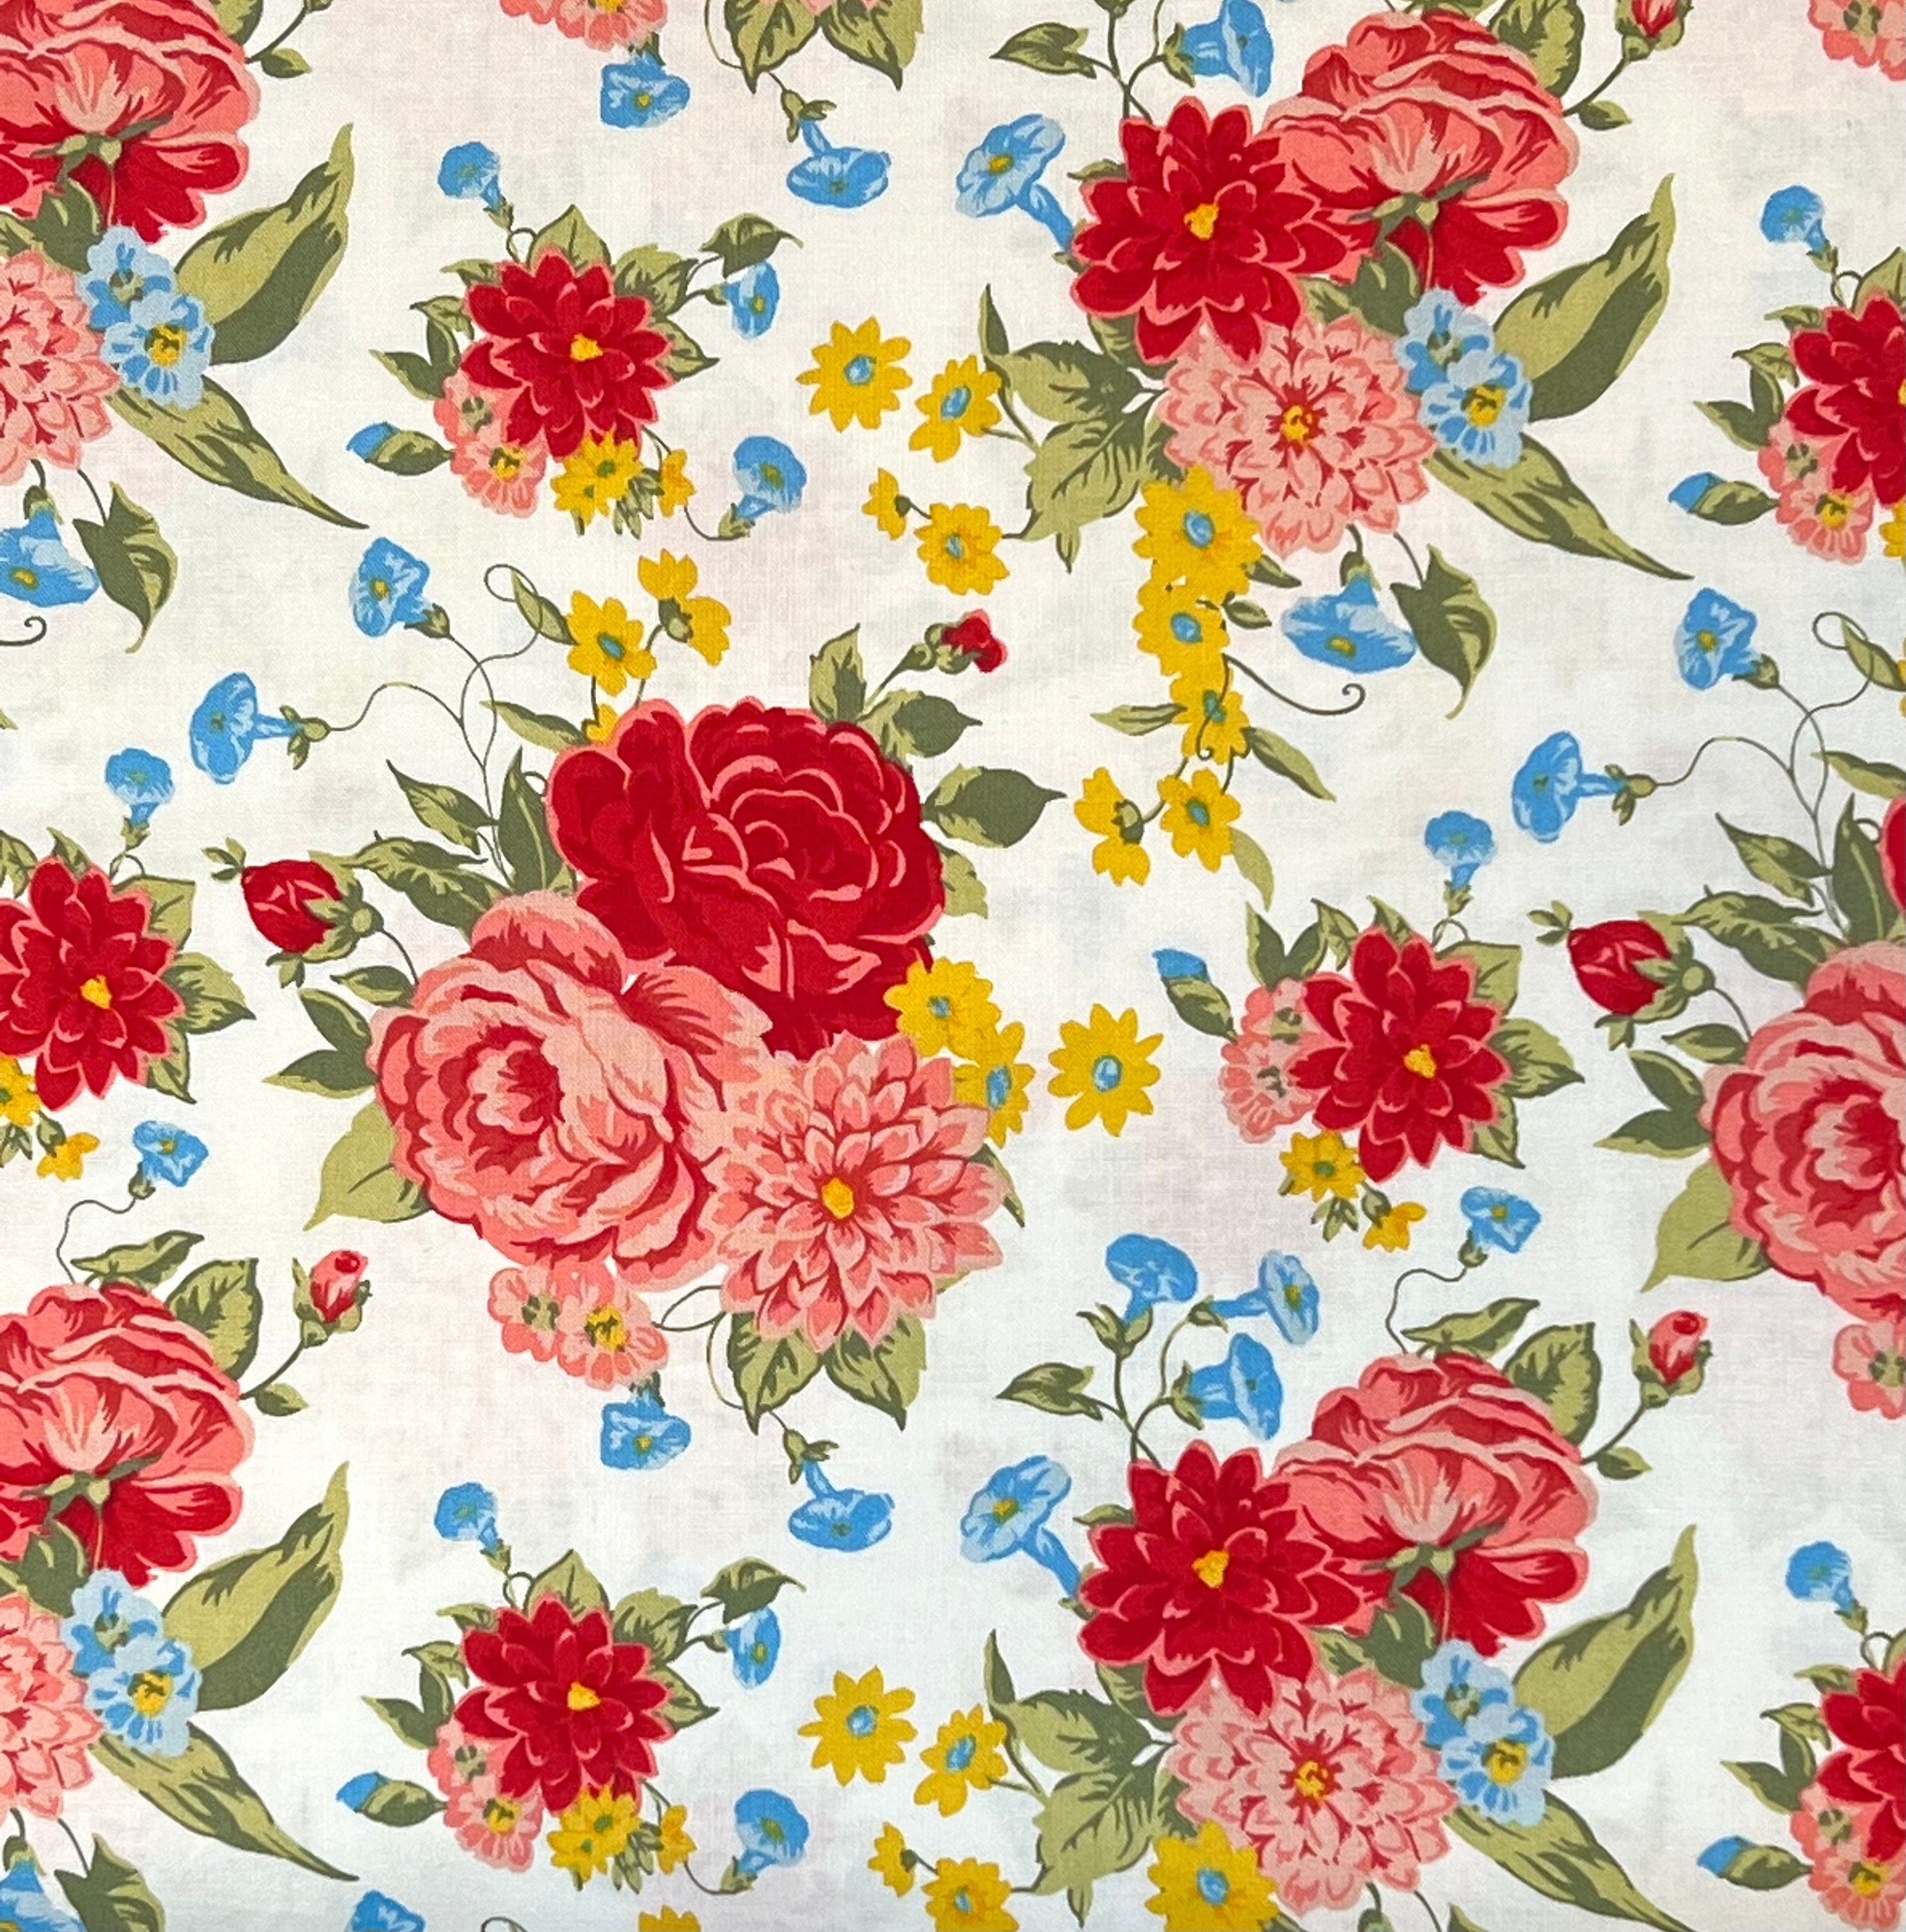 The Pioneer Woman 44 inch x 1 Yard Cotton Sweet Rose Floral Fabric Precut, White